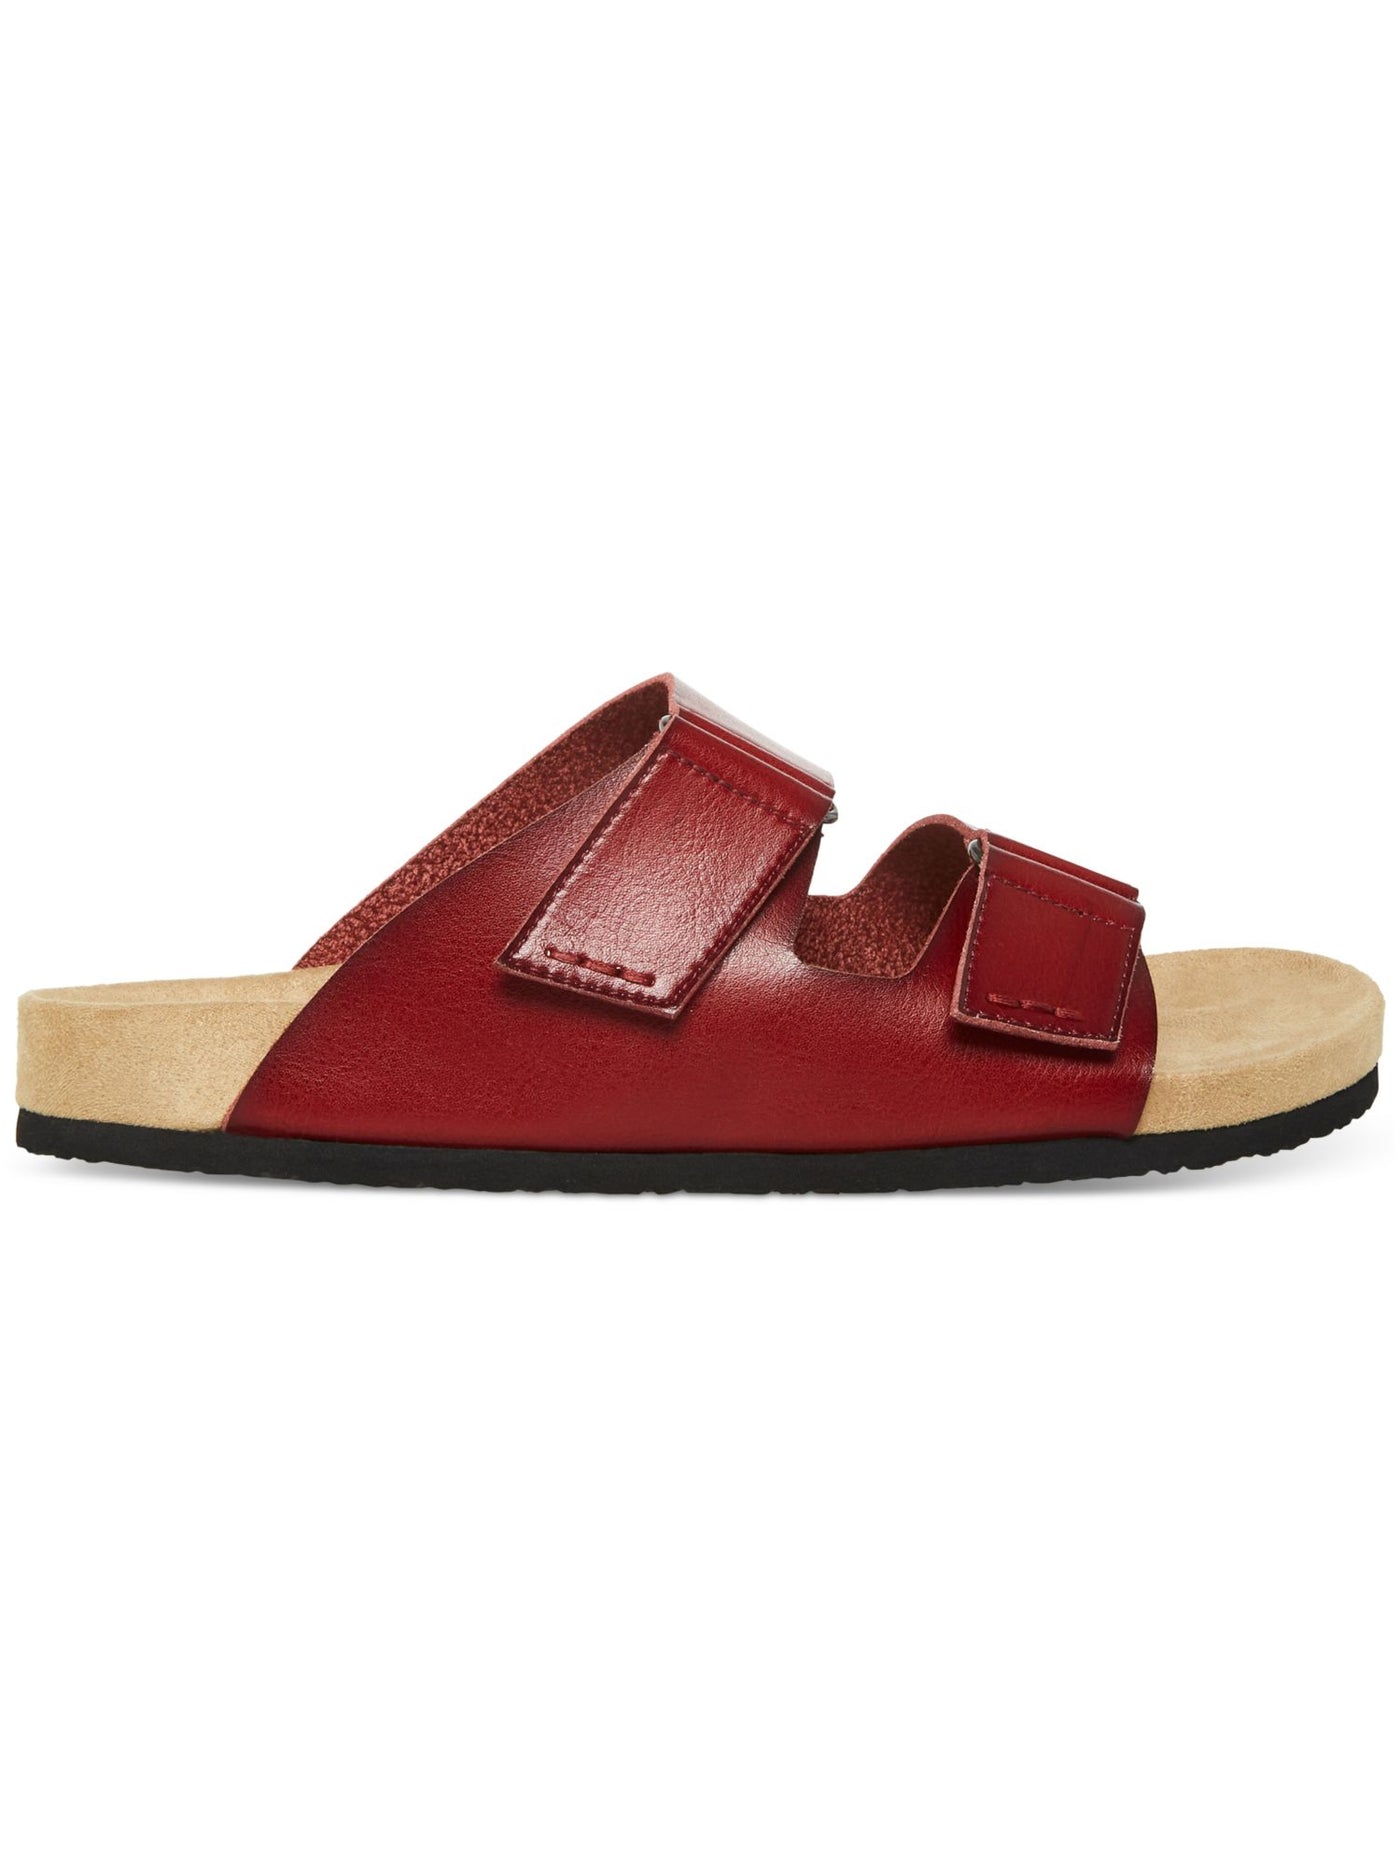 MADDEN Mens Maroon Double Straps Contoured Footbed Padded Tisson Round Toe Sandals Shoes 11.5